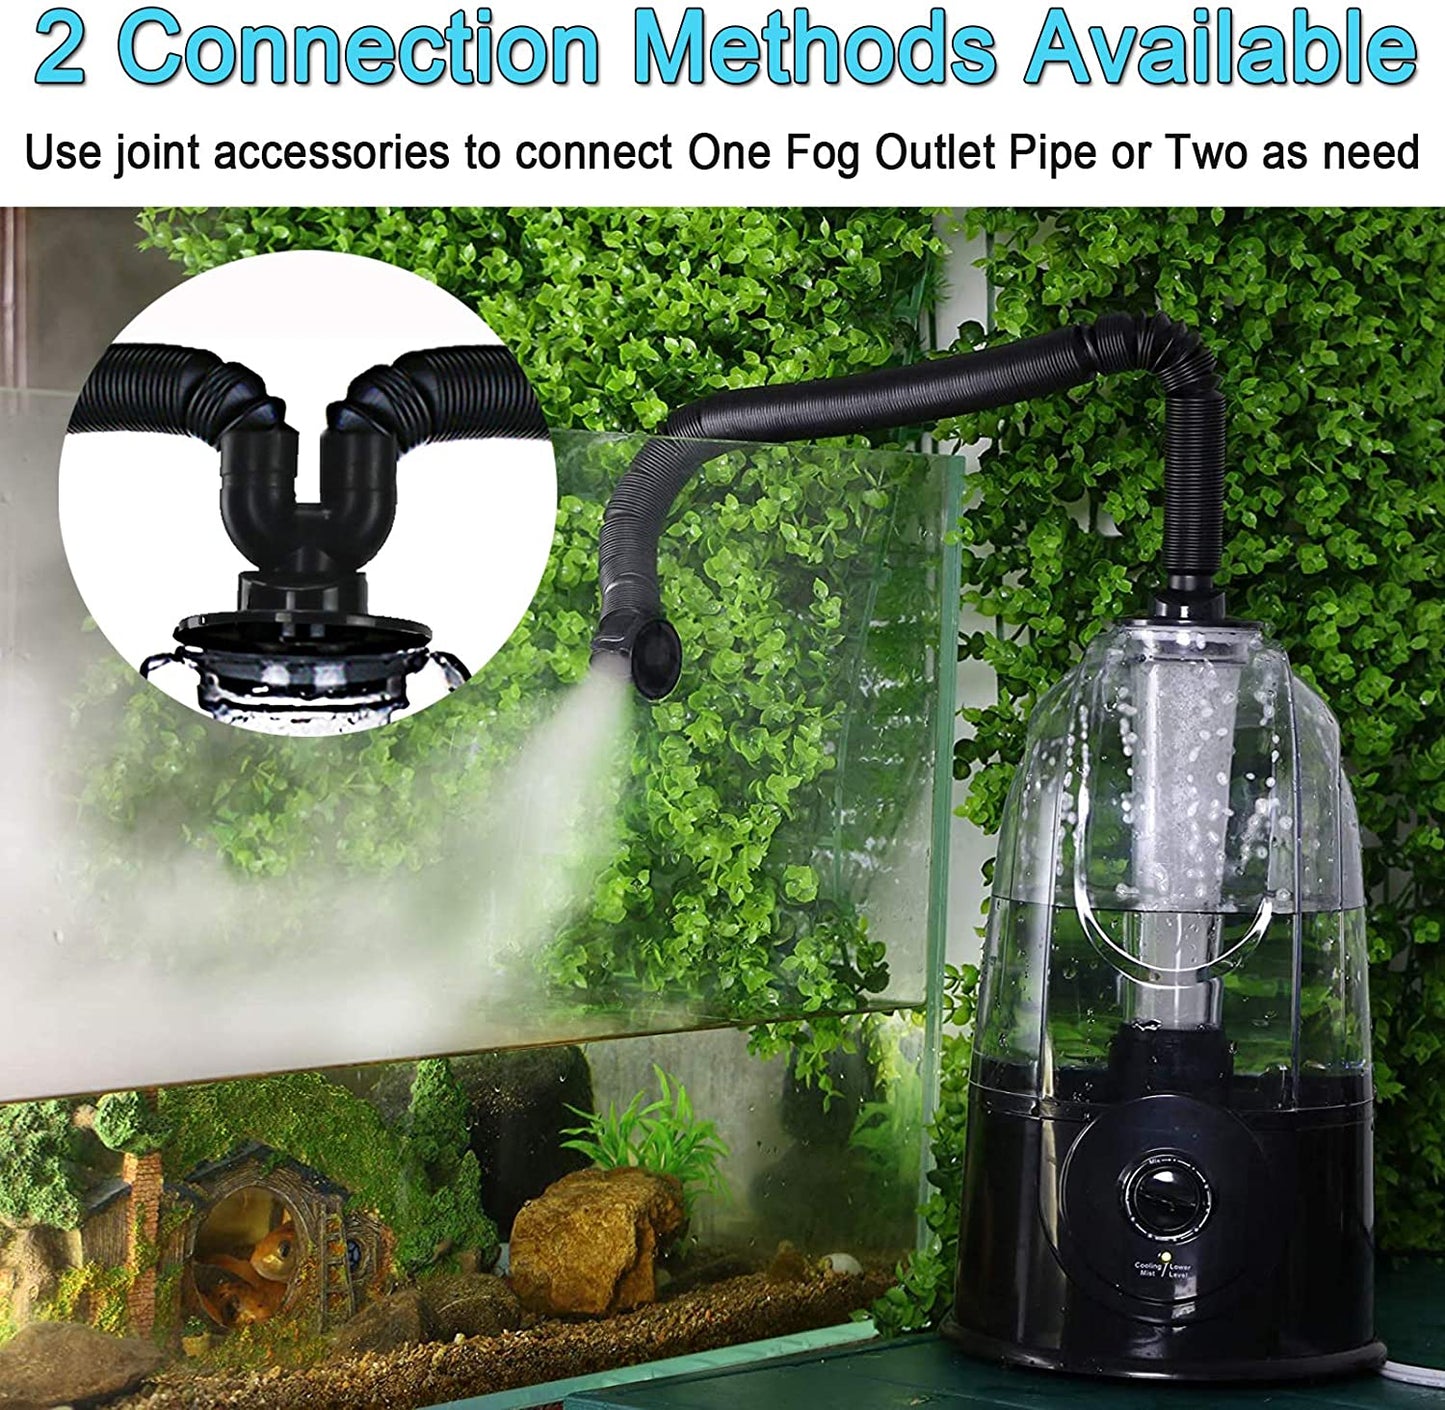 (Only for wholesale orders) Coospider Reptile Fogger Terrariums Humidifier Fog Machine Mister- 3L Tank 380L/hr High Volume Fog- for Various Reptiles/Amphibians/Herps New version